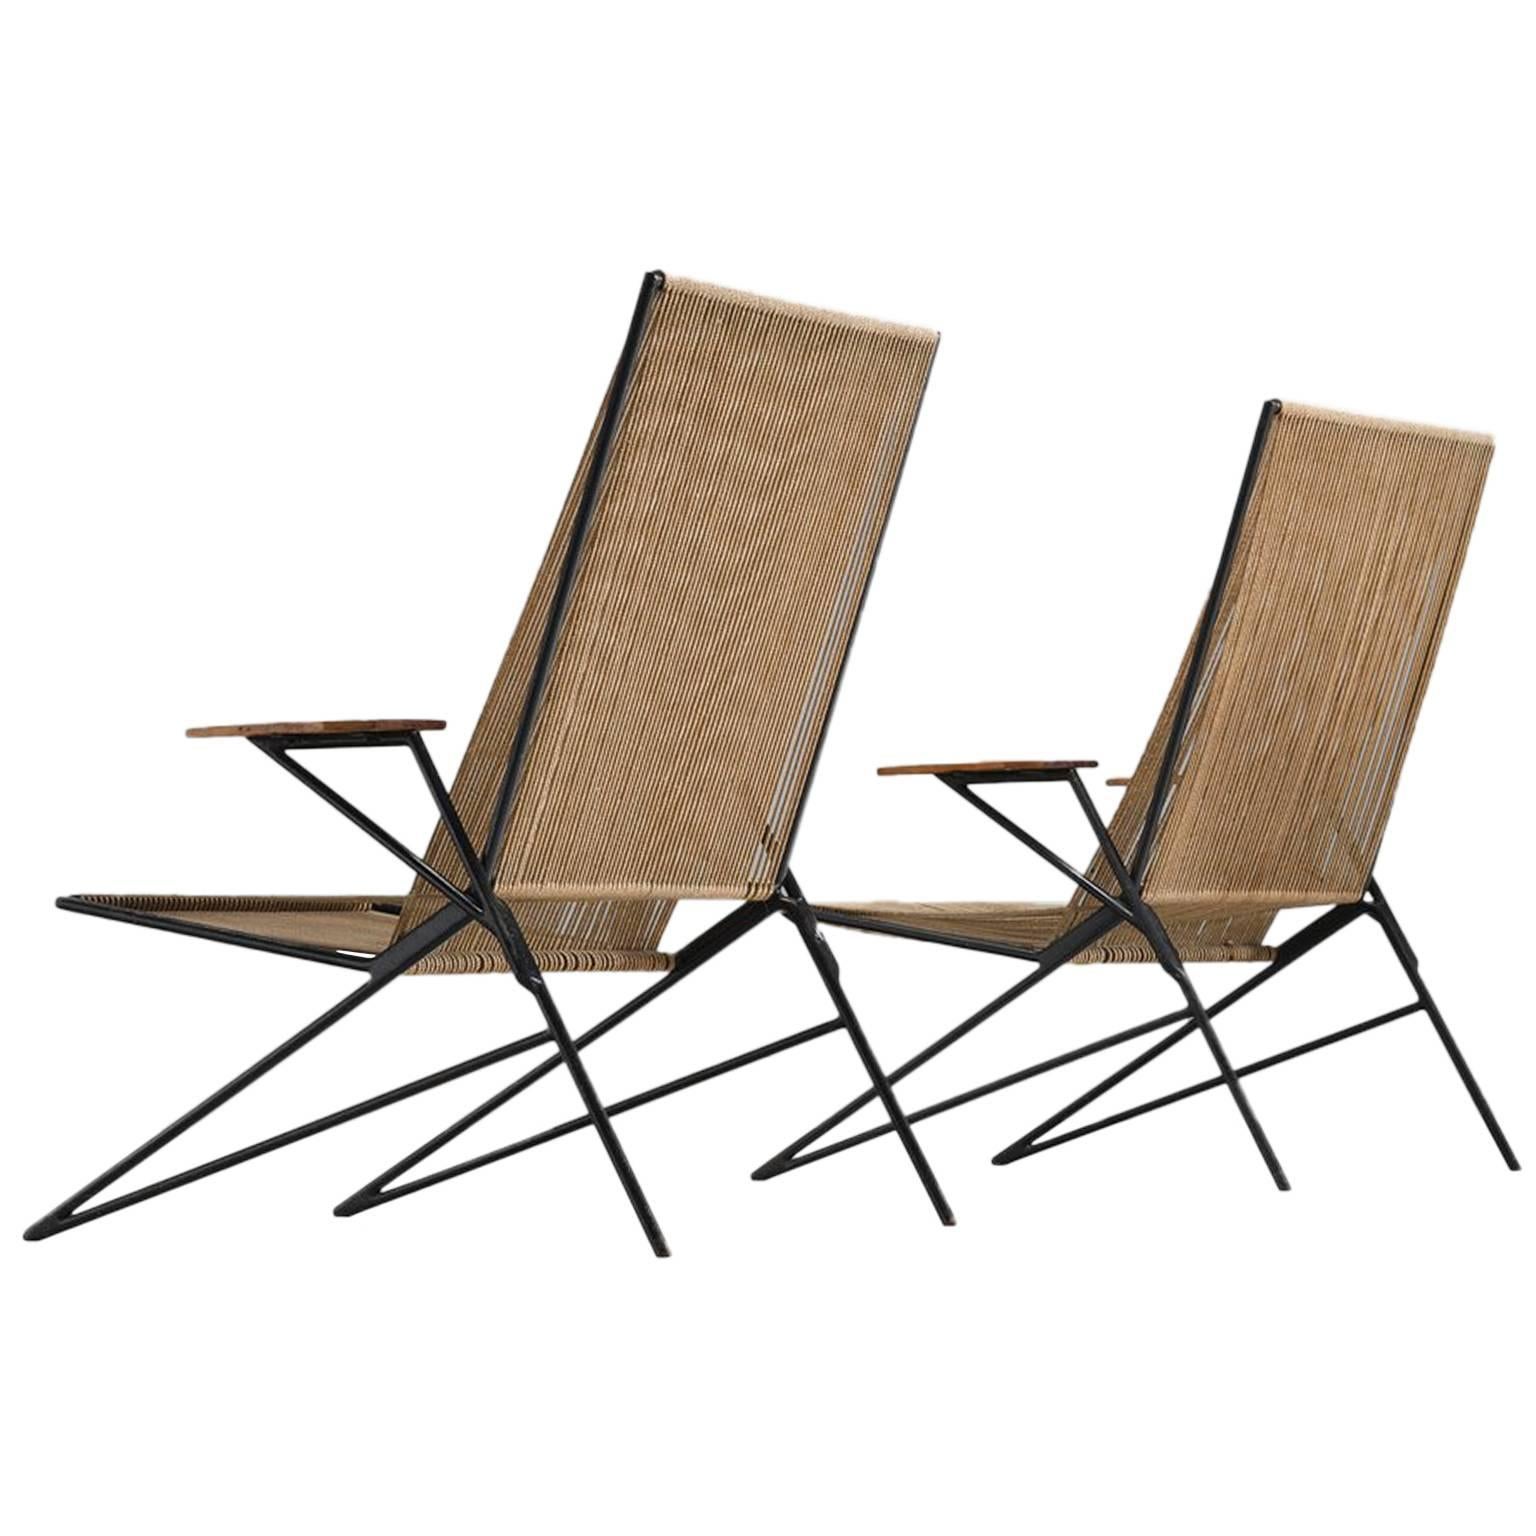 Highback Stringed Chairs with High Back and Armrests